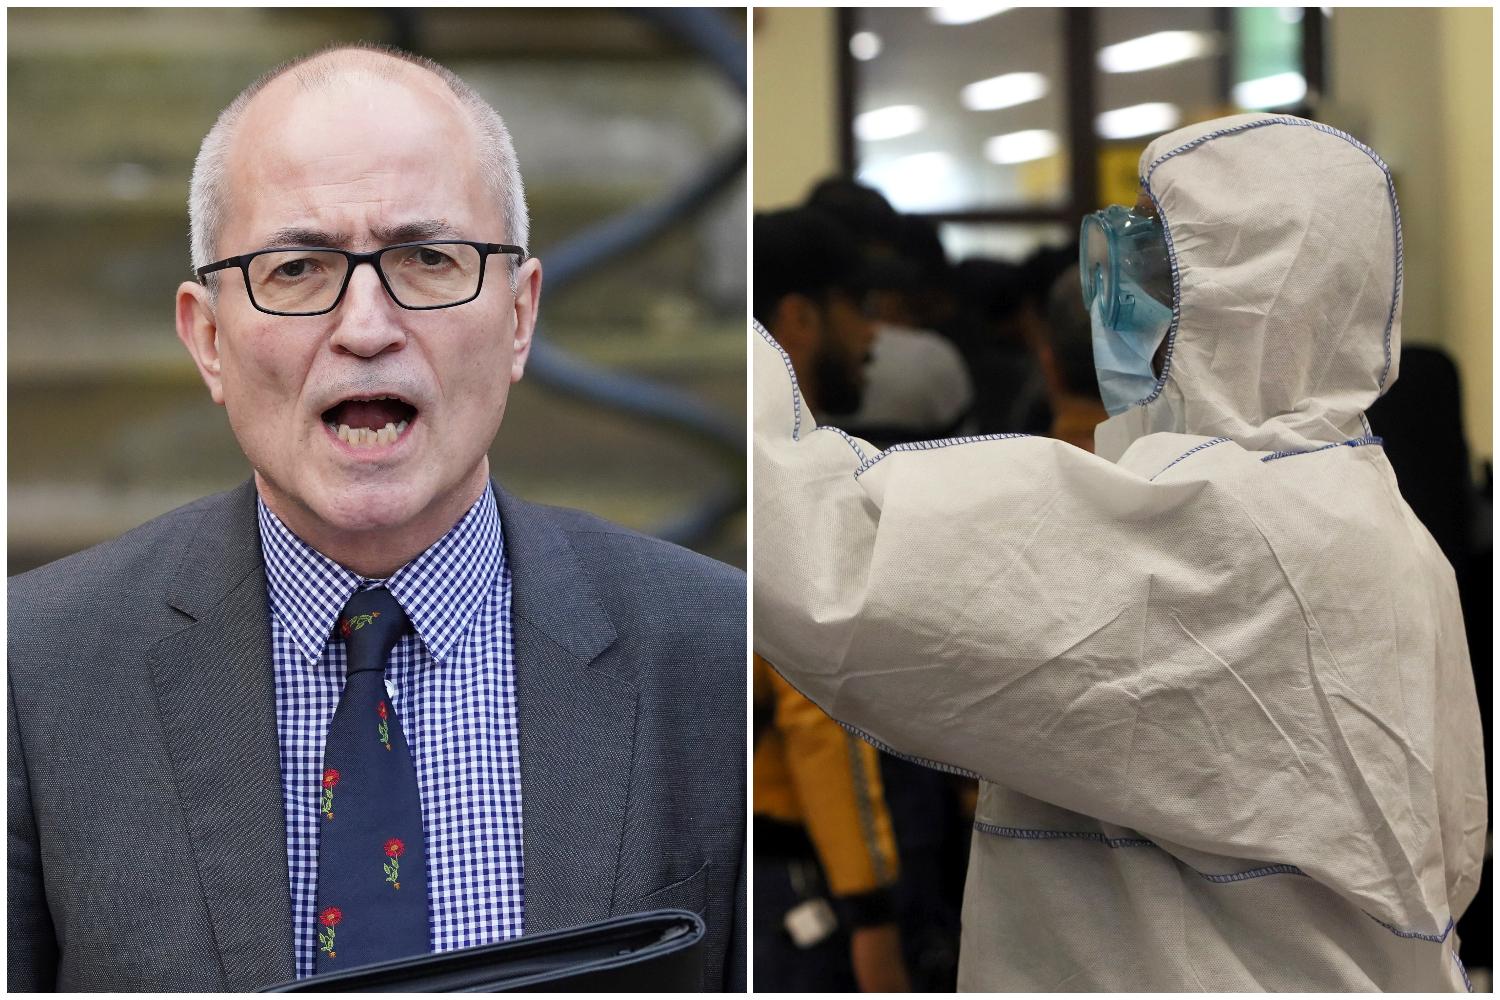 york-university-chief-working-to-ensure-city-remains-safe-after-student-hit-with-coronavirus.jpg